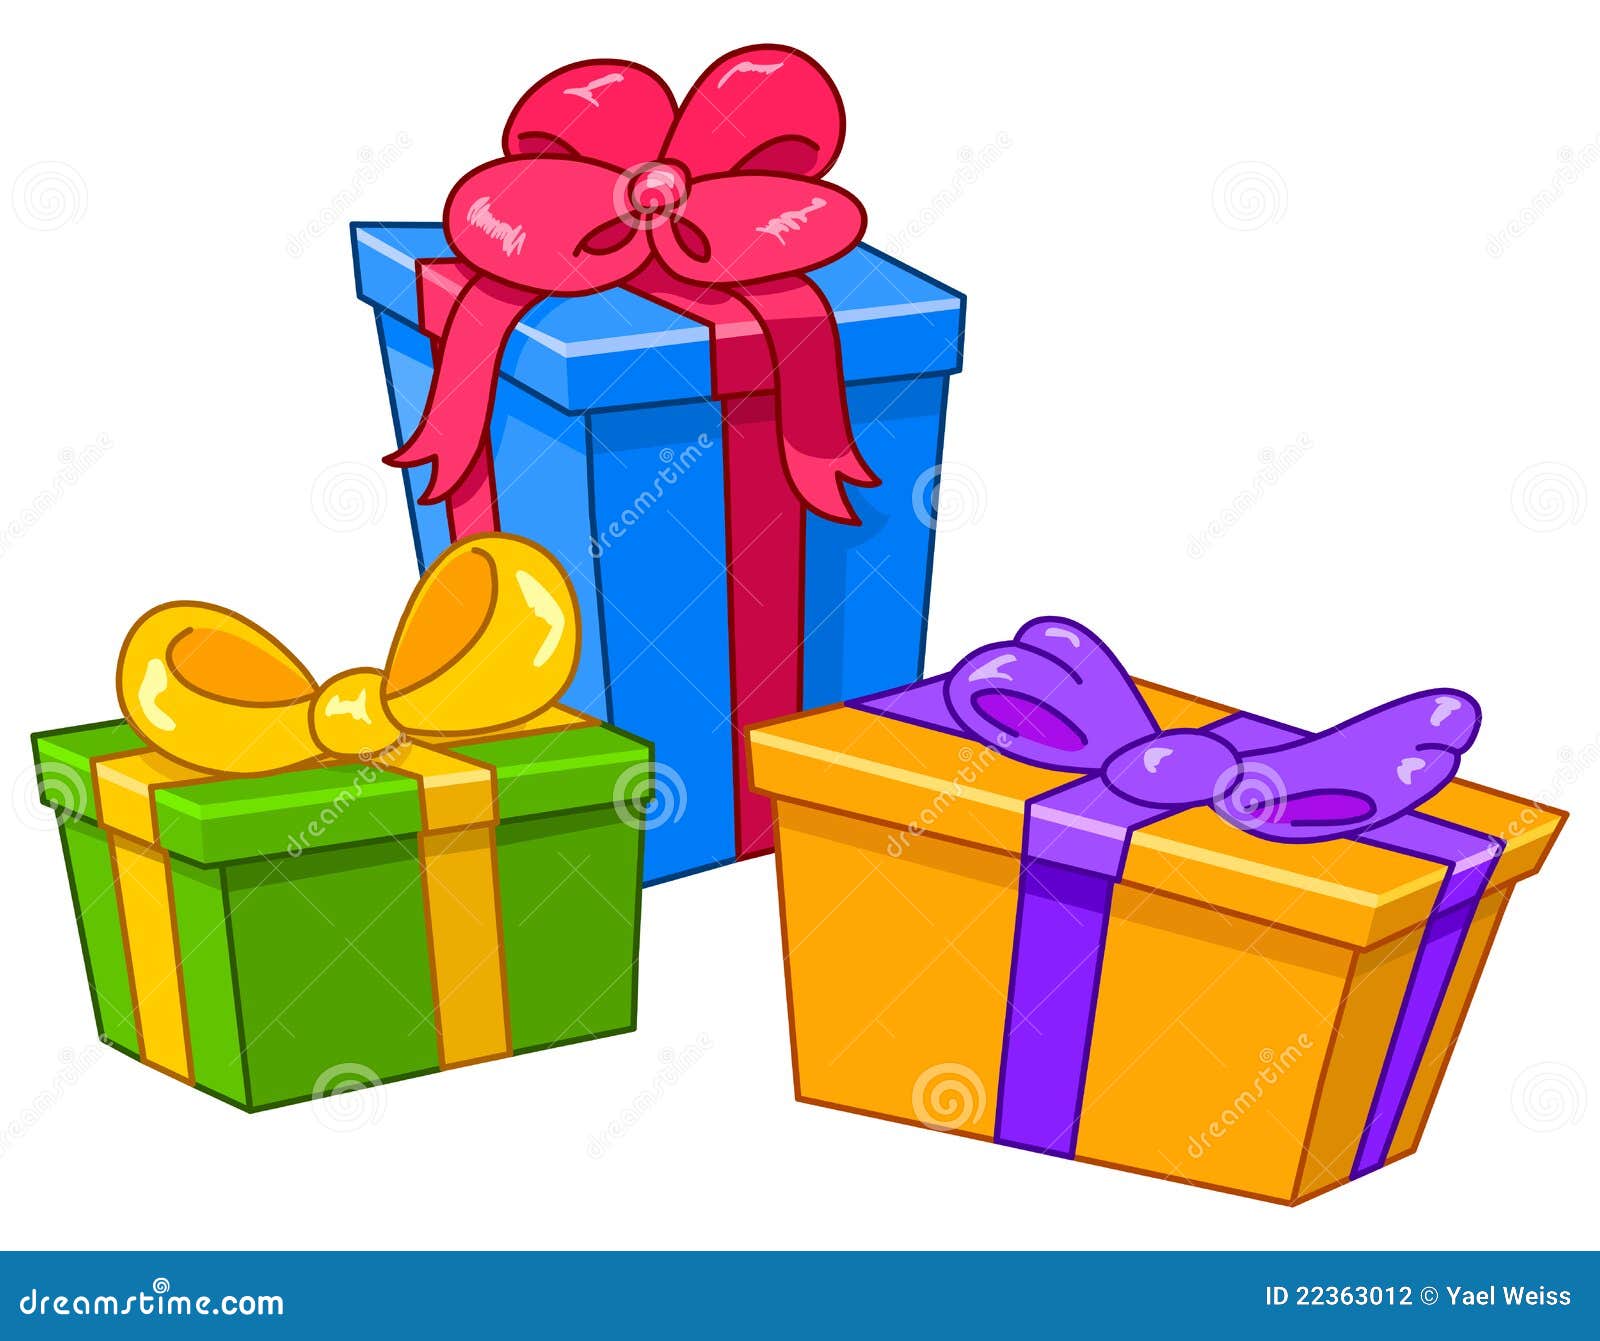 Cartoon Gifts Stock Photography - Image: 22363012